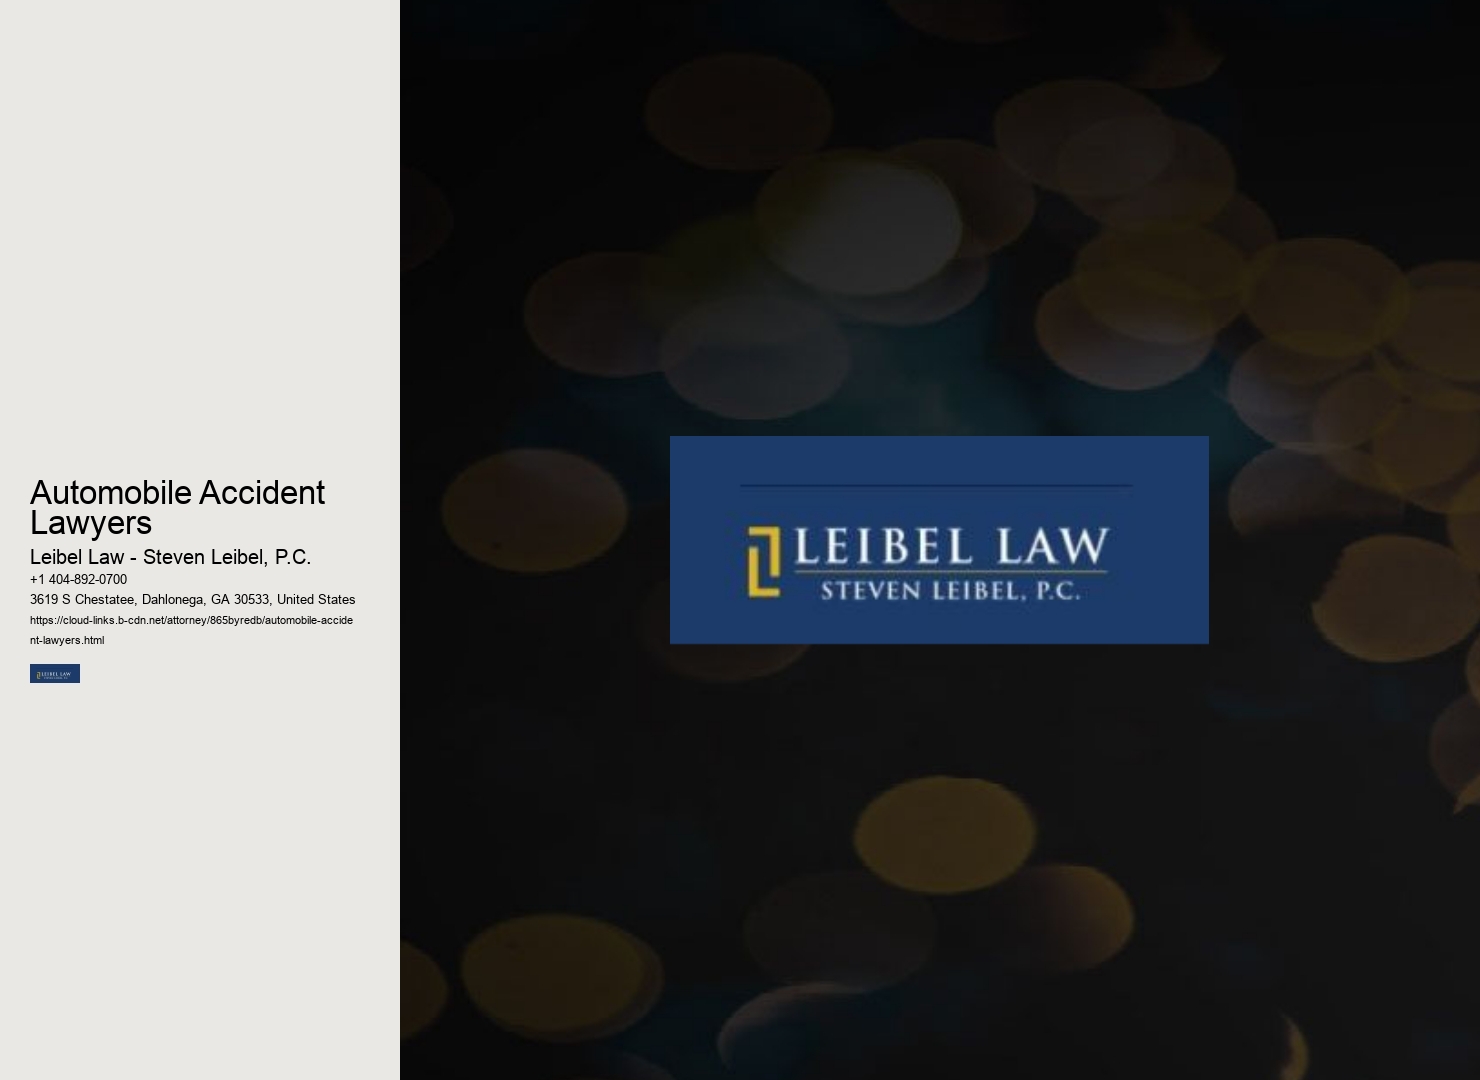 Automobile Accident Lawyers